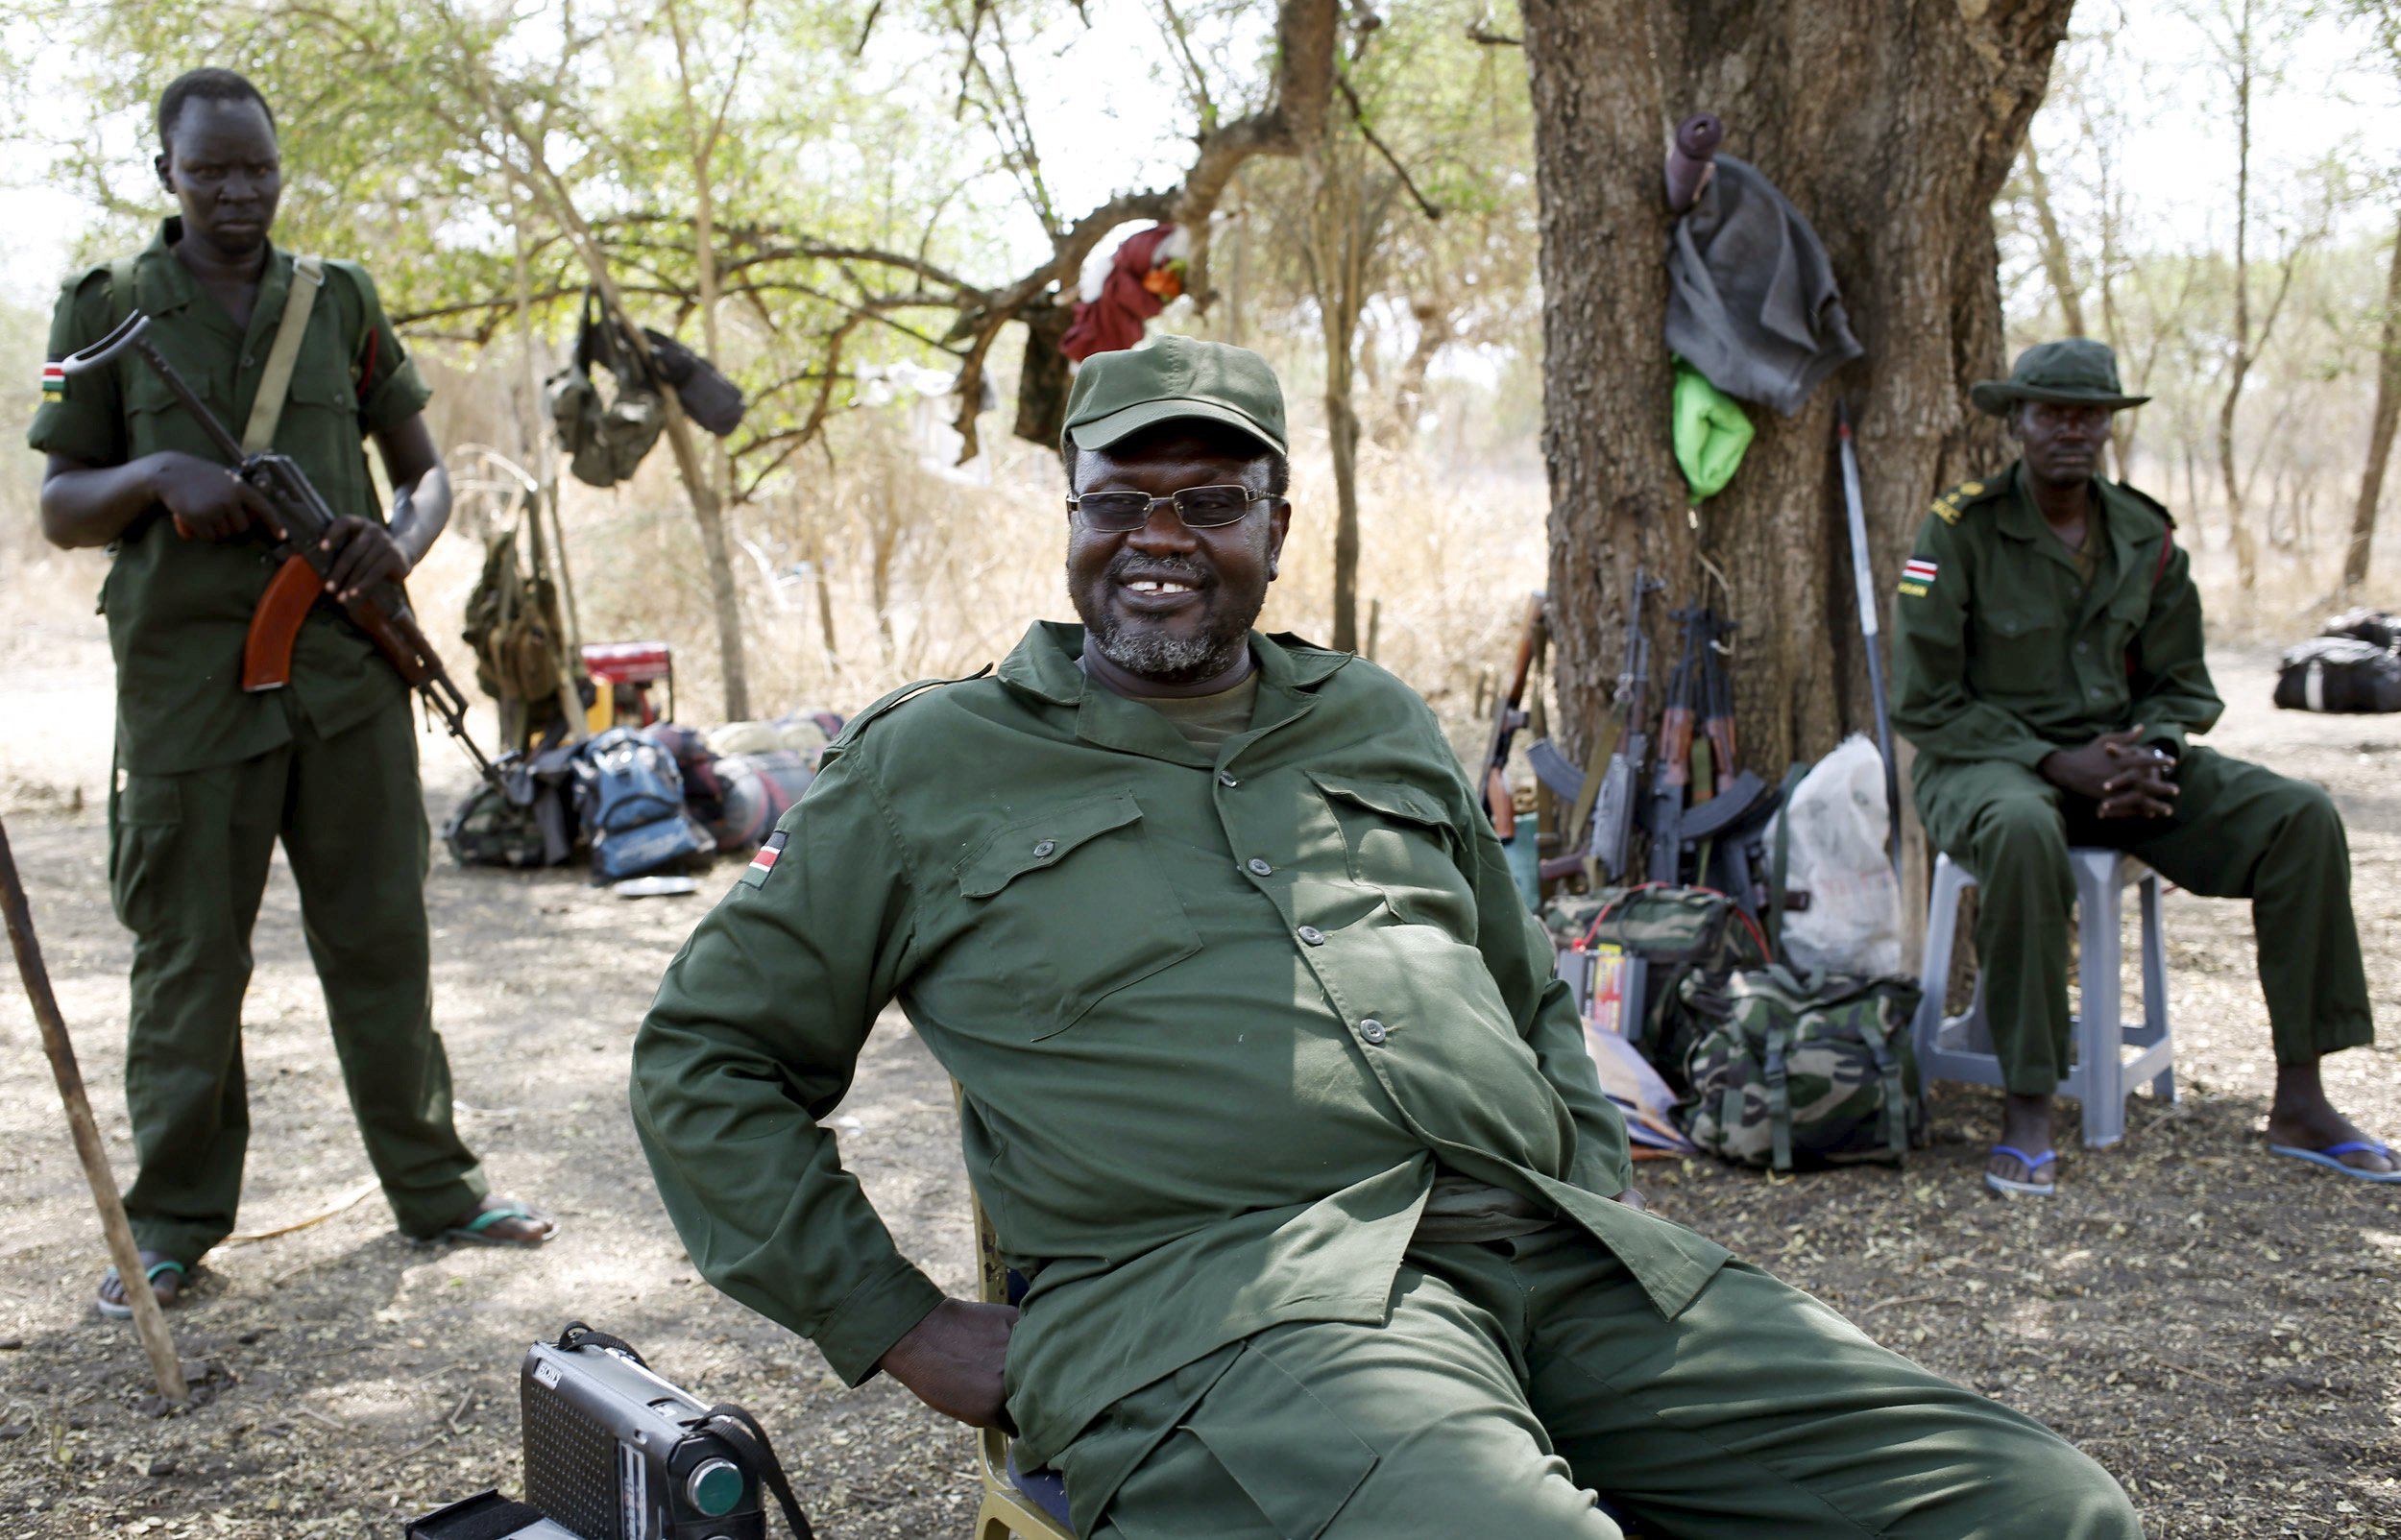 A file photo shows South Sudan's rebel leader Machar sitting near his men in a rebel-controlled territory in Jonglei State